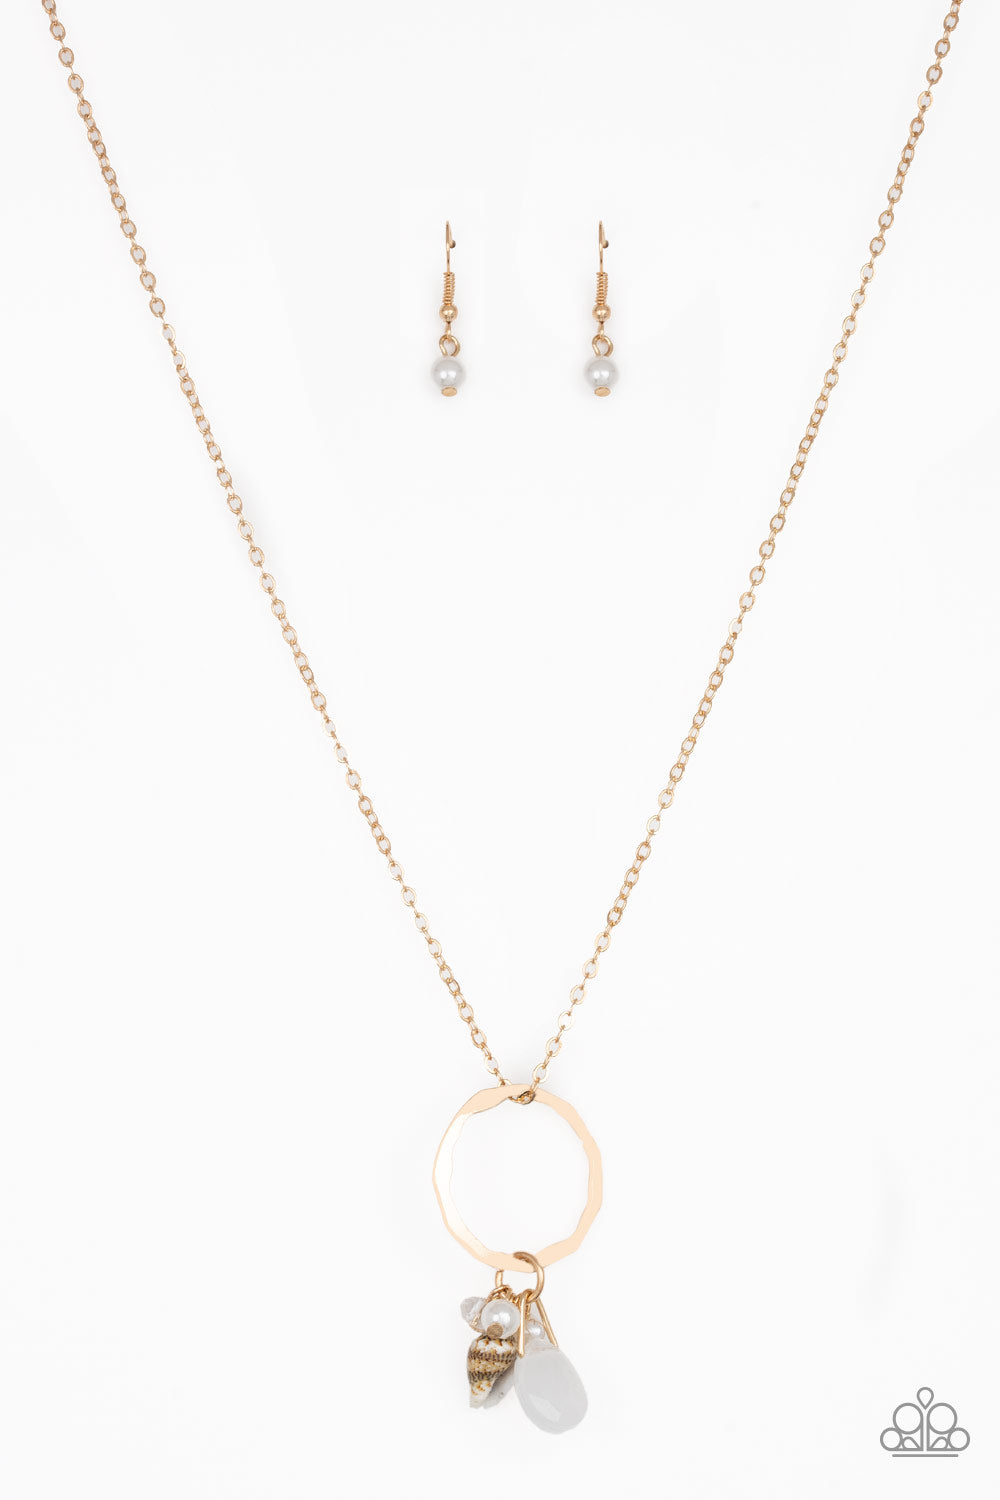 Coastal Couture - Gold Necklace